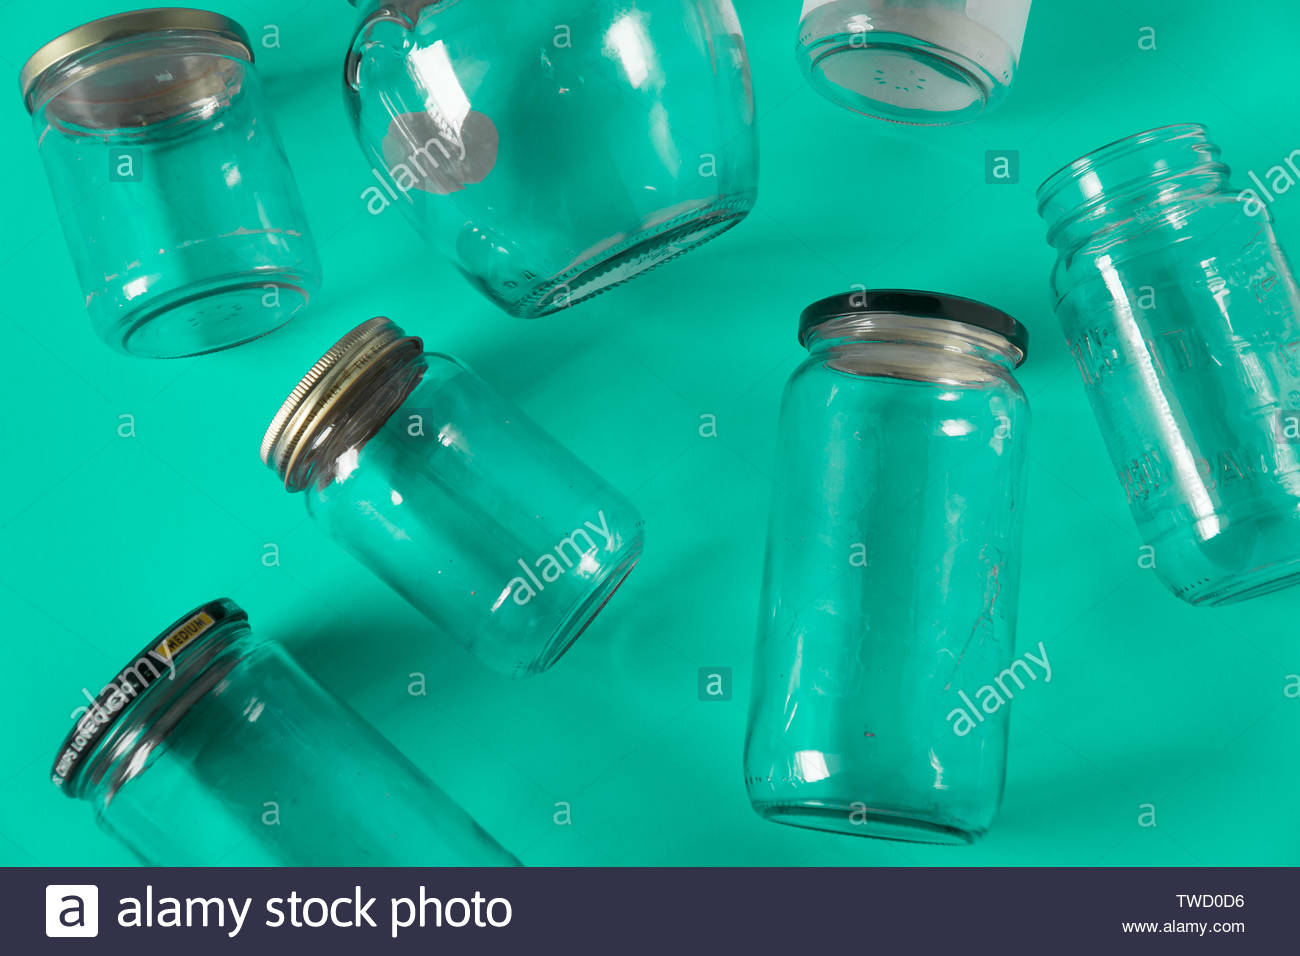 transparent glass jars with lids isolated on teal green background top view flat lay recycling concept for environmental awareness segregated recycl TWD0D6